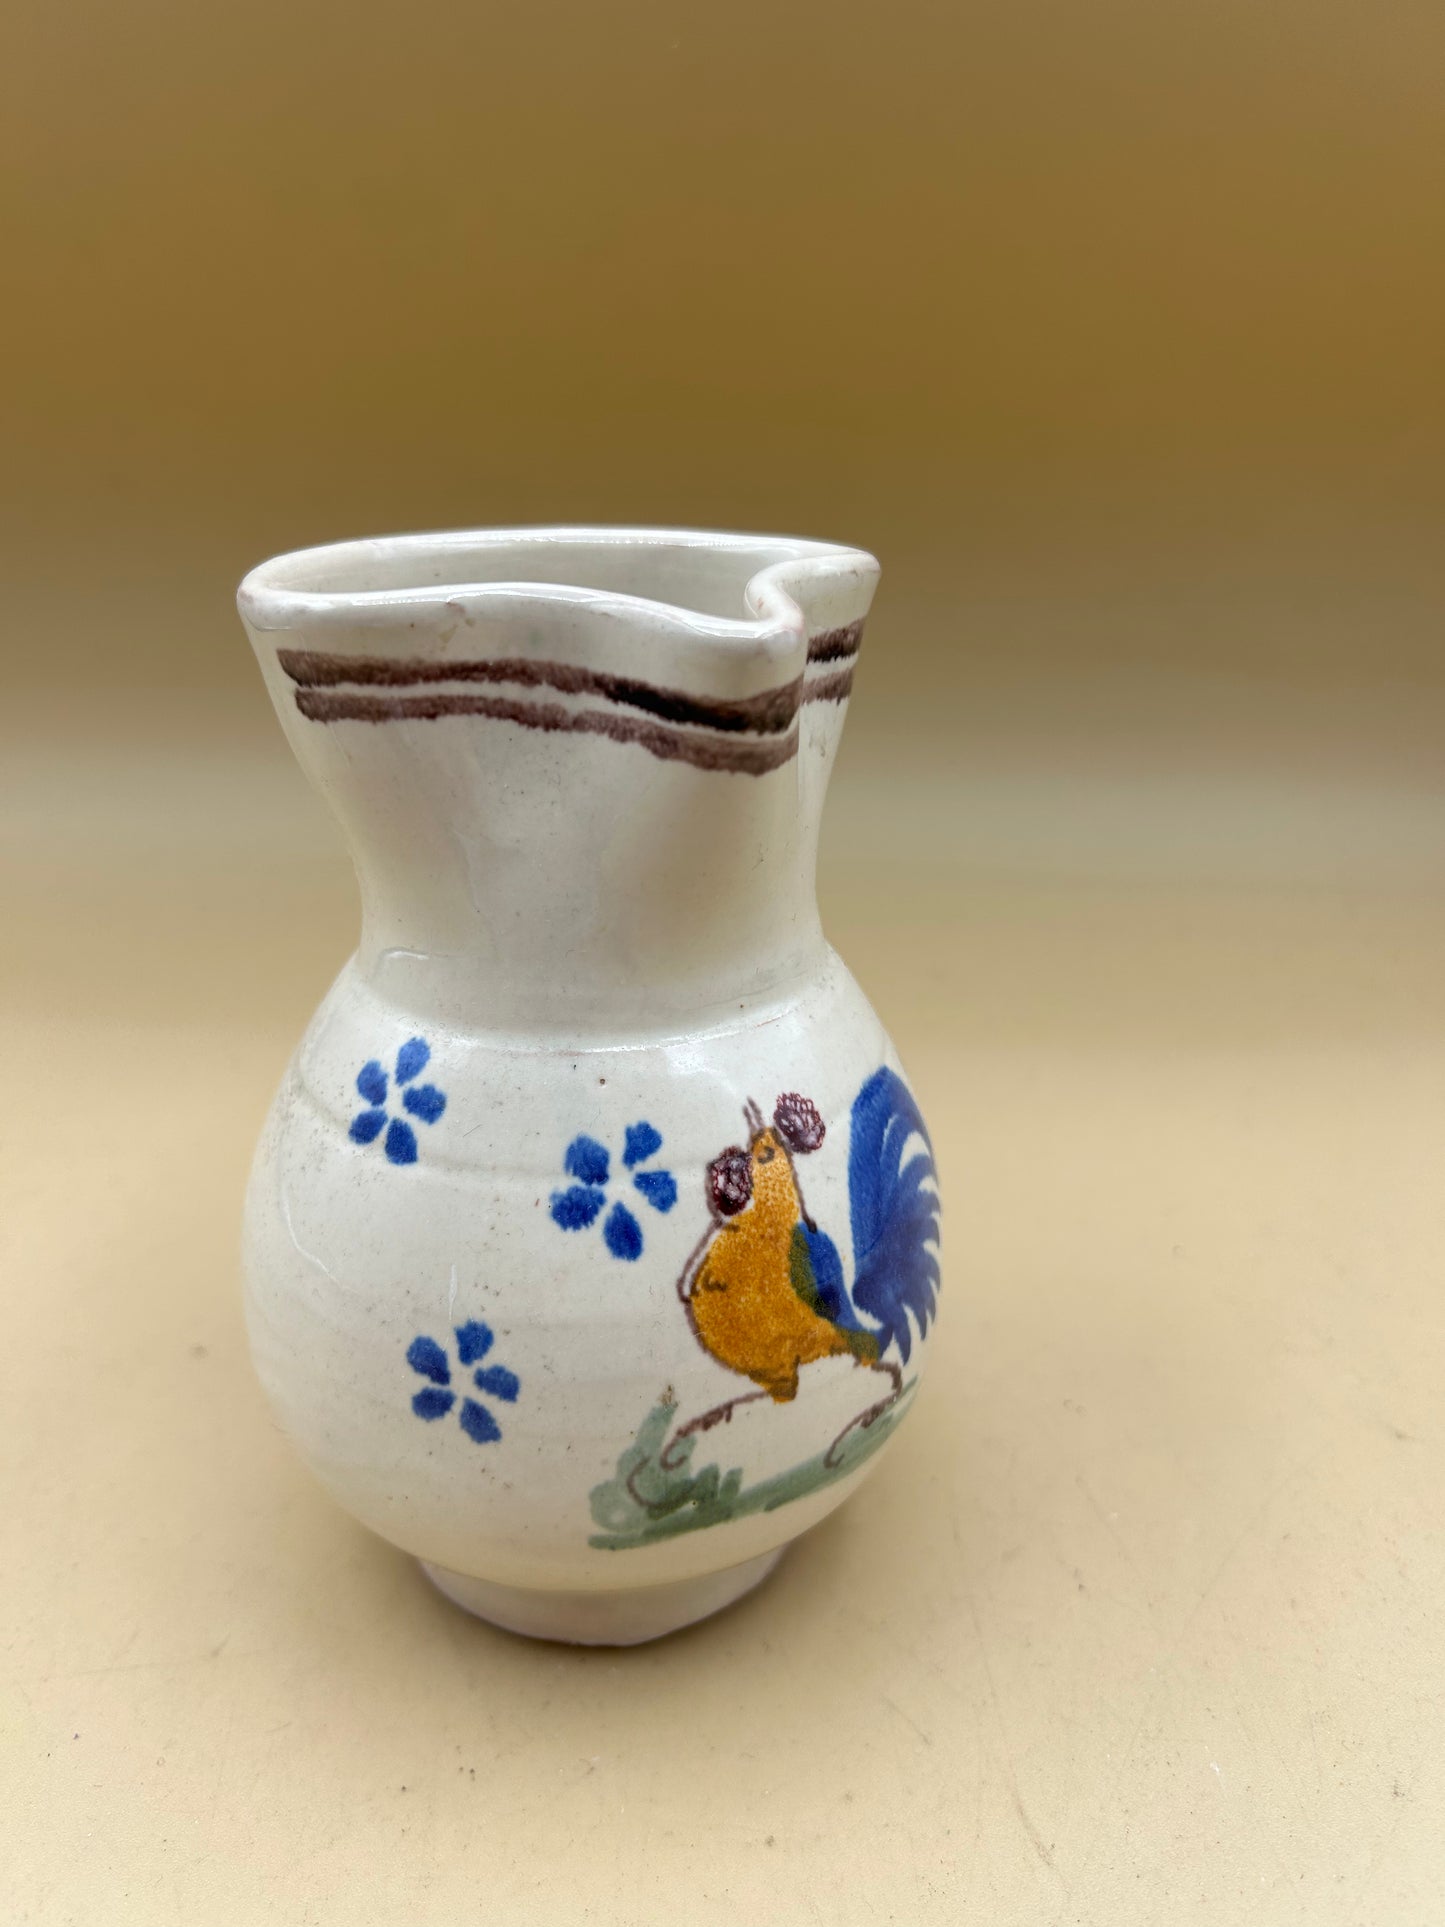 Hand-painted ceramic jug with rooster